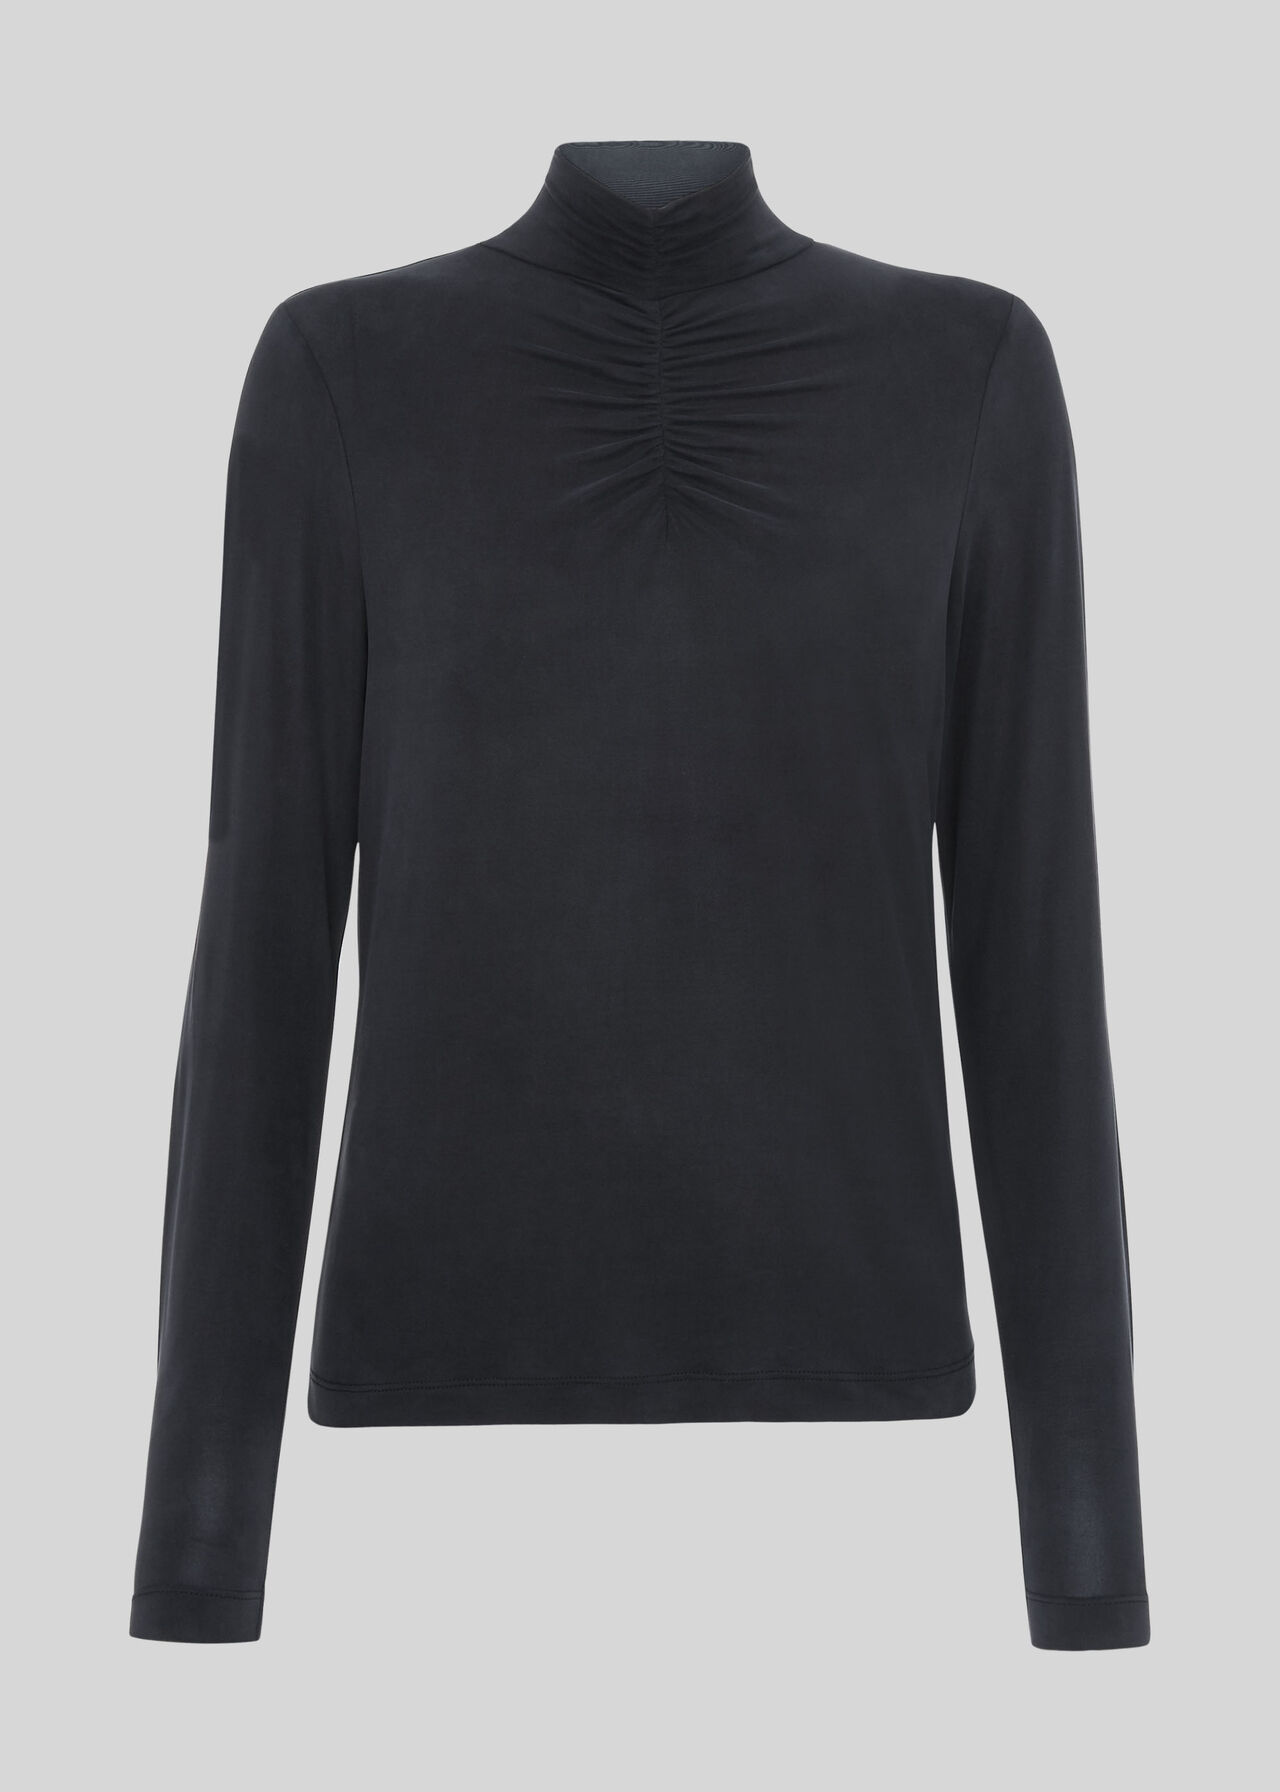 Black High Neck Gathered Cupro Top | WHISTLES